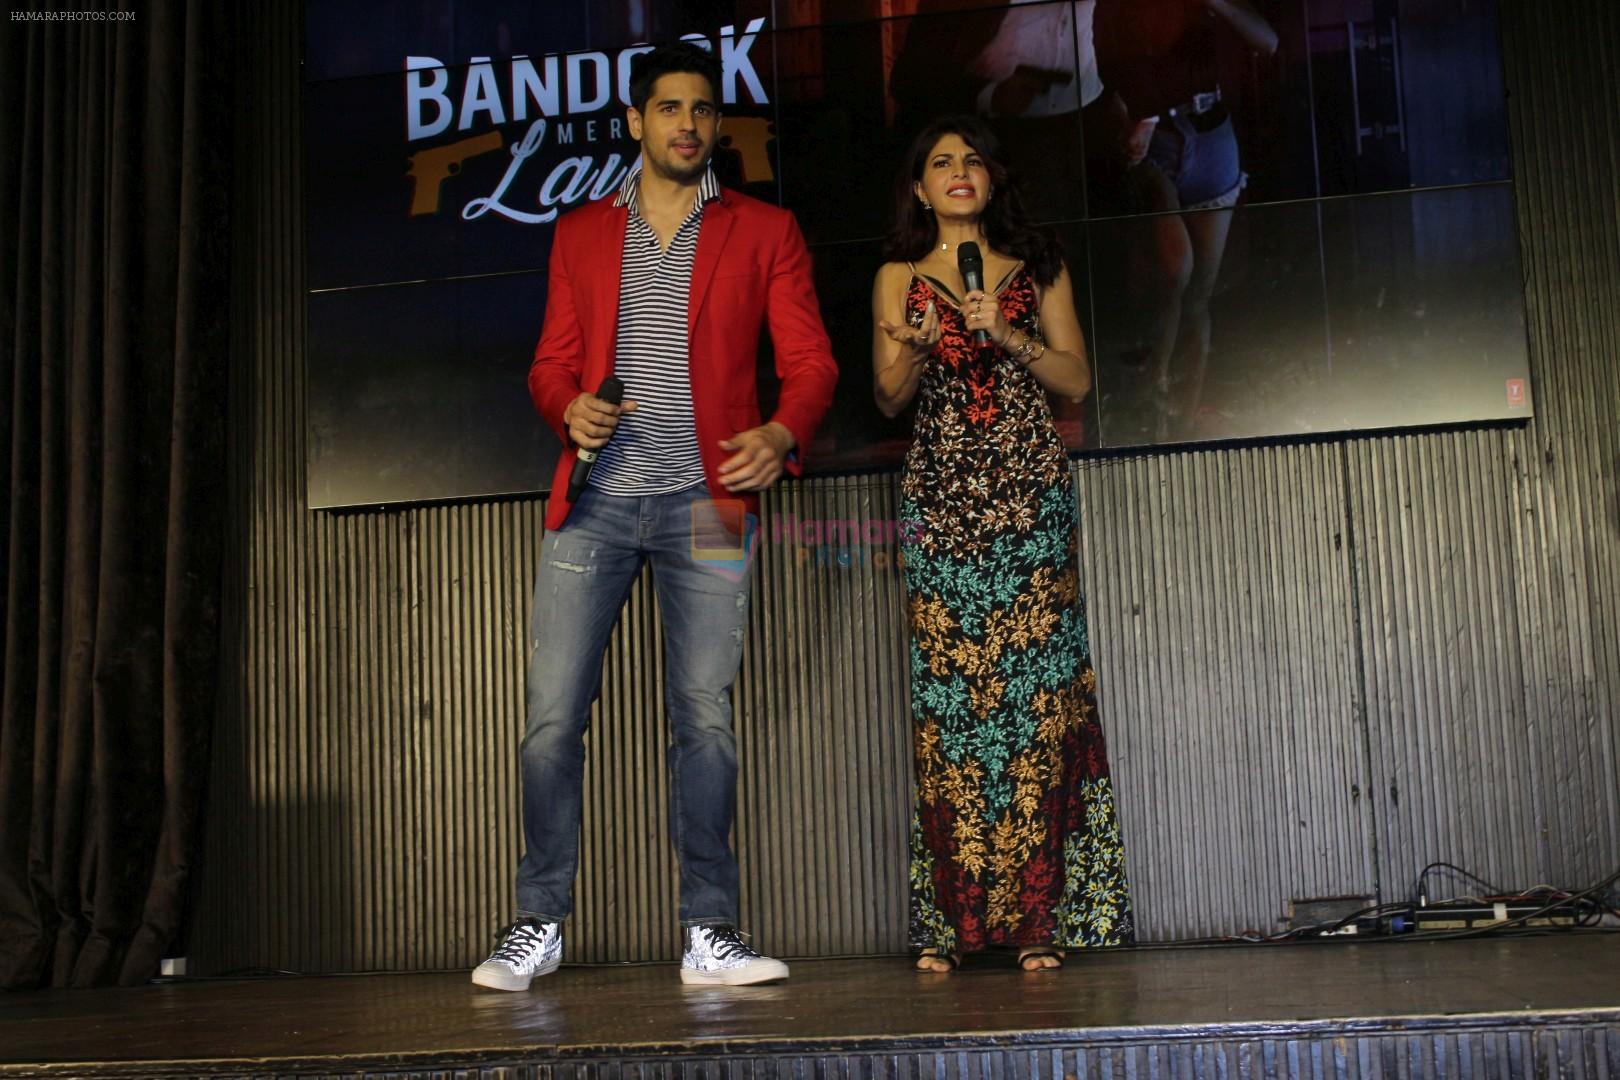 Sidharth Malhotra, Jacqueline Fernandez at the Song Launch Of Film A Gentleman on 15th Aug 2017